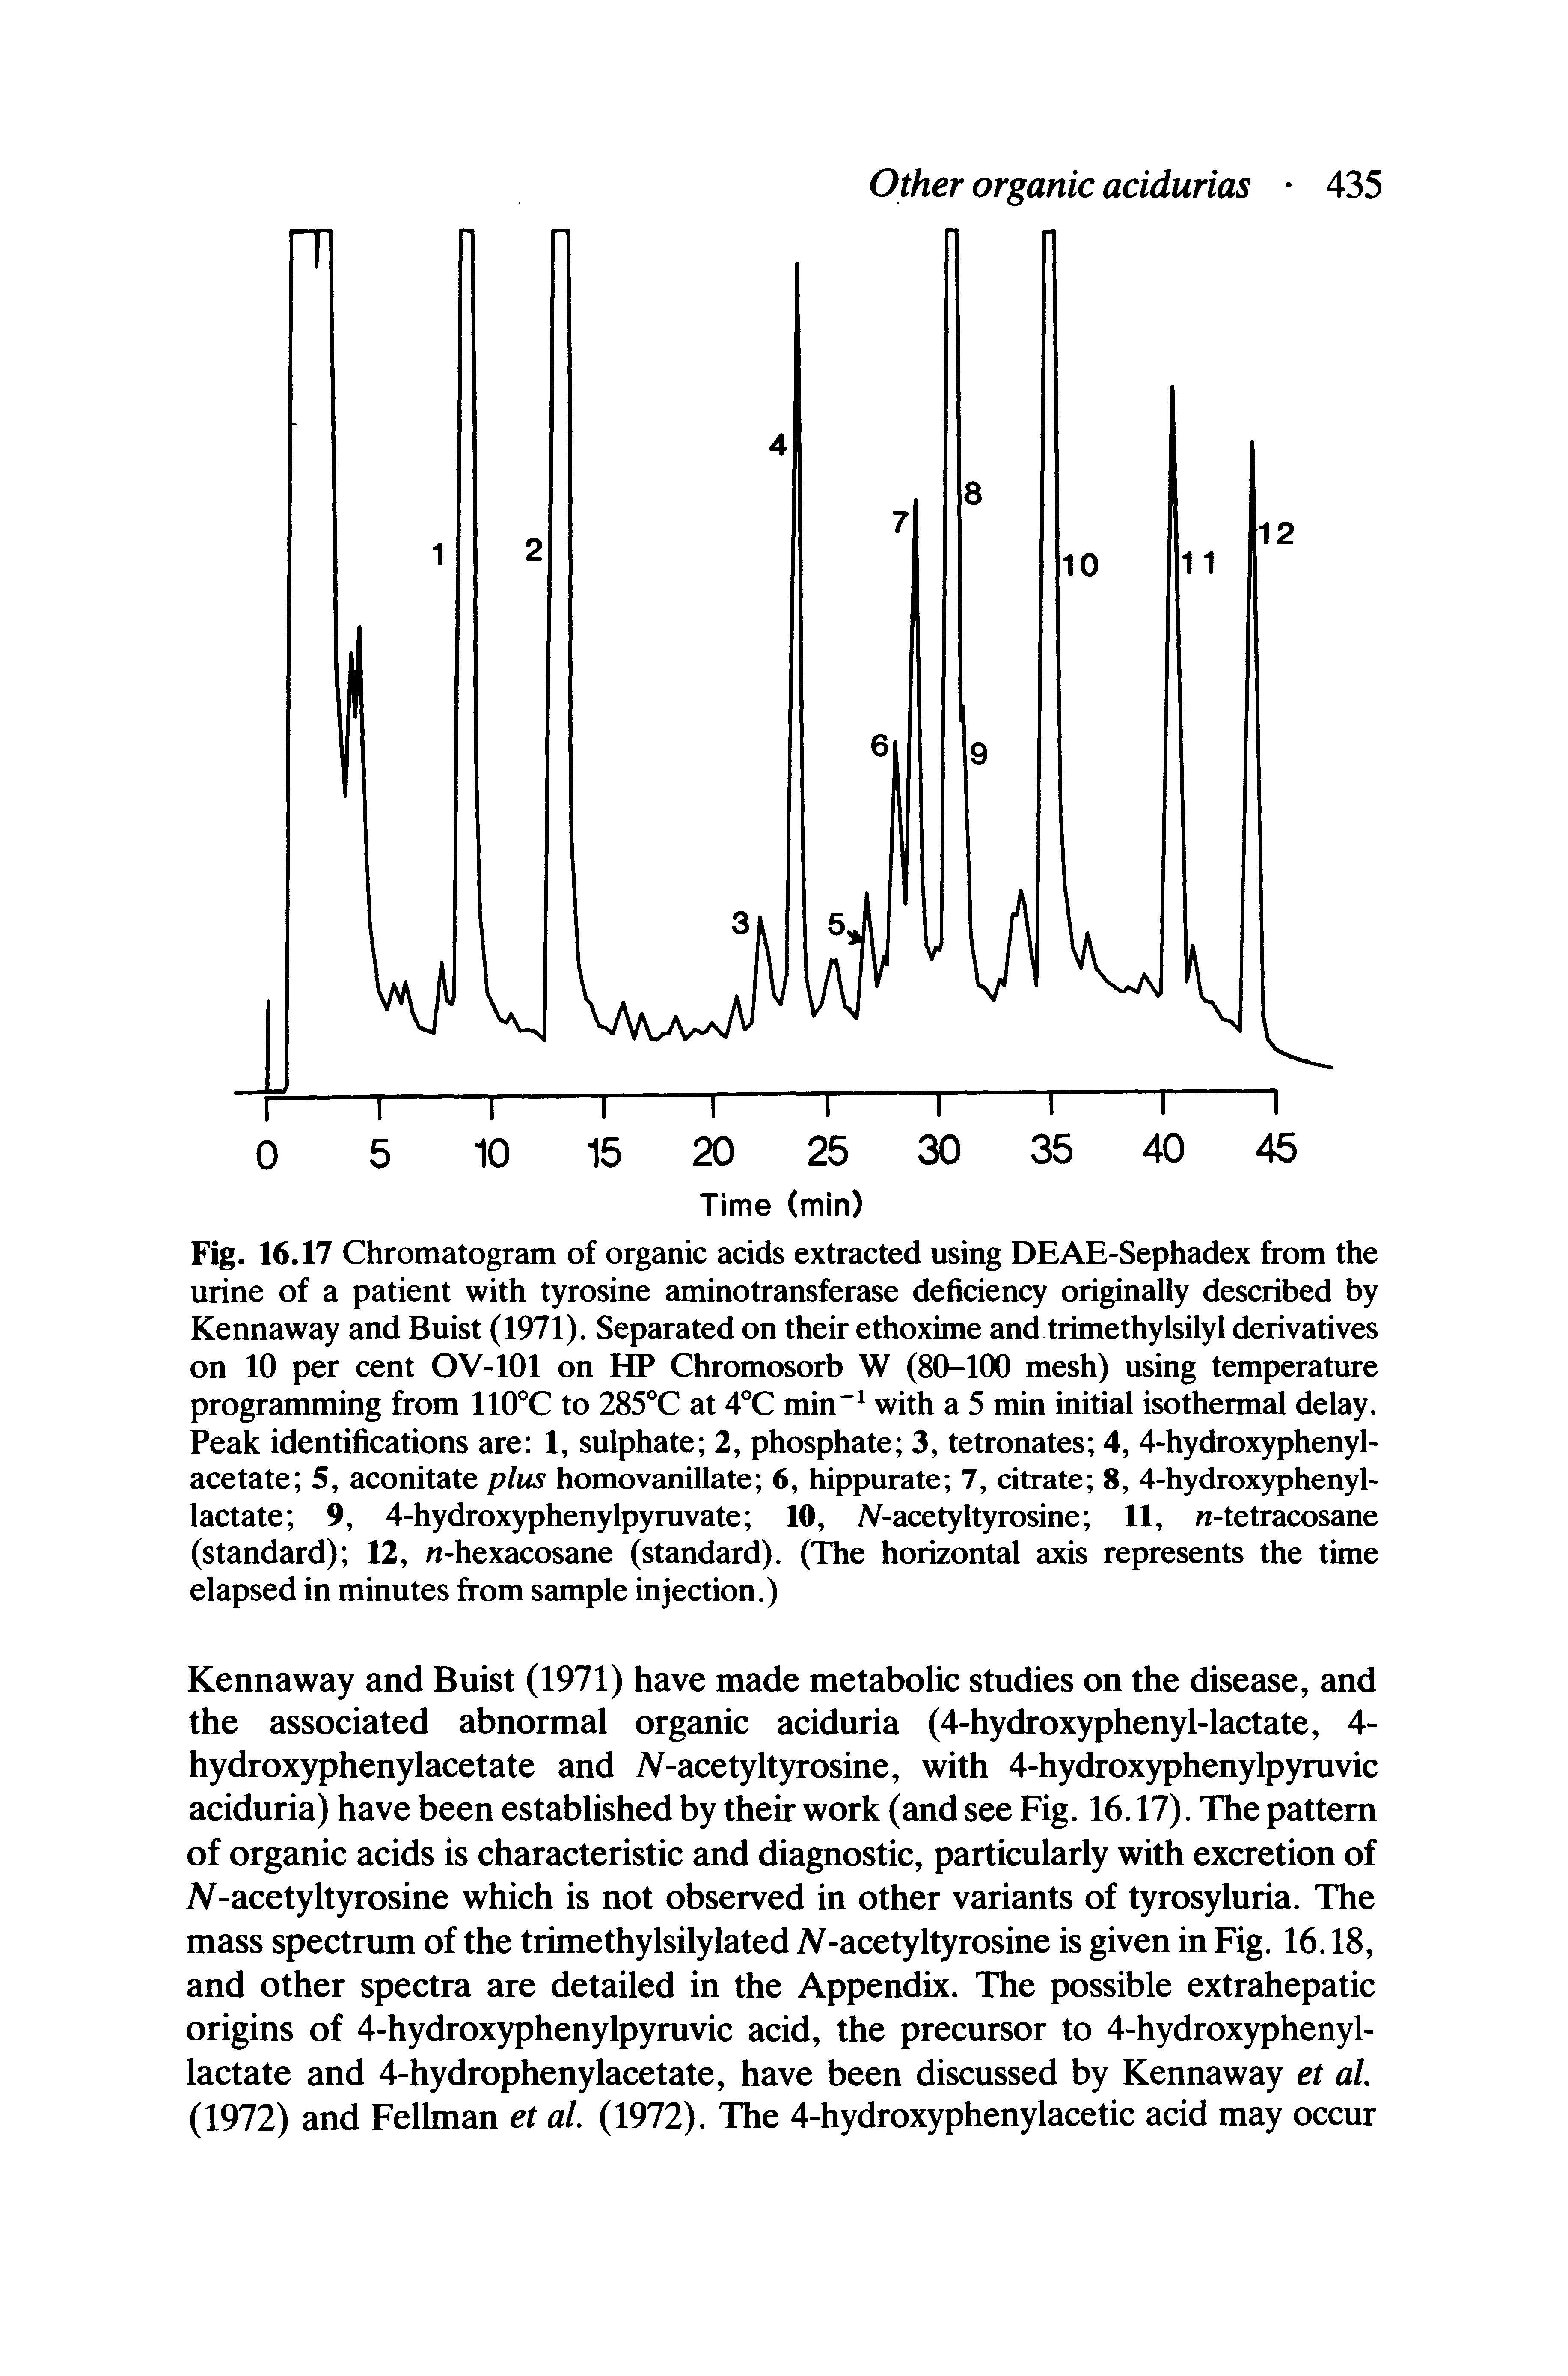 Fig. 16.17 Chromatogram of organic acids extracted using DEAE-Sephadex from the urine of a patient with tyrosine aminotransferase deficiency originally described by Kennaway and Buist (1971). Separated on their ethoxime and trimethylsilyl derivatives on 10 per cent OV-101 on HP Chromosorb W (80-100 mesh) using temperature programming from 110°C to 285 C at 4°C min" with a 5 min initial isothermal delay. Peak identifications are 1, sulphate 2, phosphate 3, tetronates 4, 4-hydroxyphenyl-acetate 5, aconitate plus homovanillate 6, hippurate 7, citrate 8, 4-hydroxyphenyl-lactate 9, 4-hydroxyphenylpyruvate 10, N-acetyltyrosine 11, -tetracosane (standard) 12, w-hexacosane (standard). (The horizontal axis represents the time elapsed in minutes from sample injection.)...